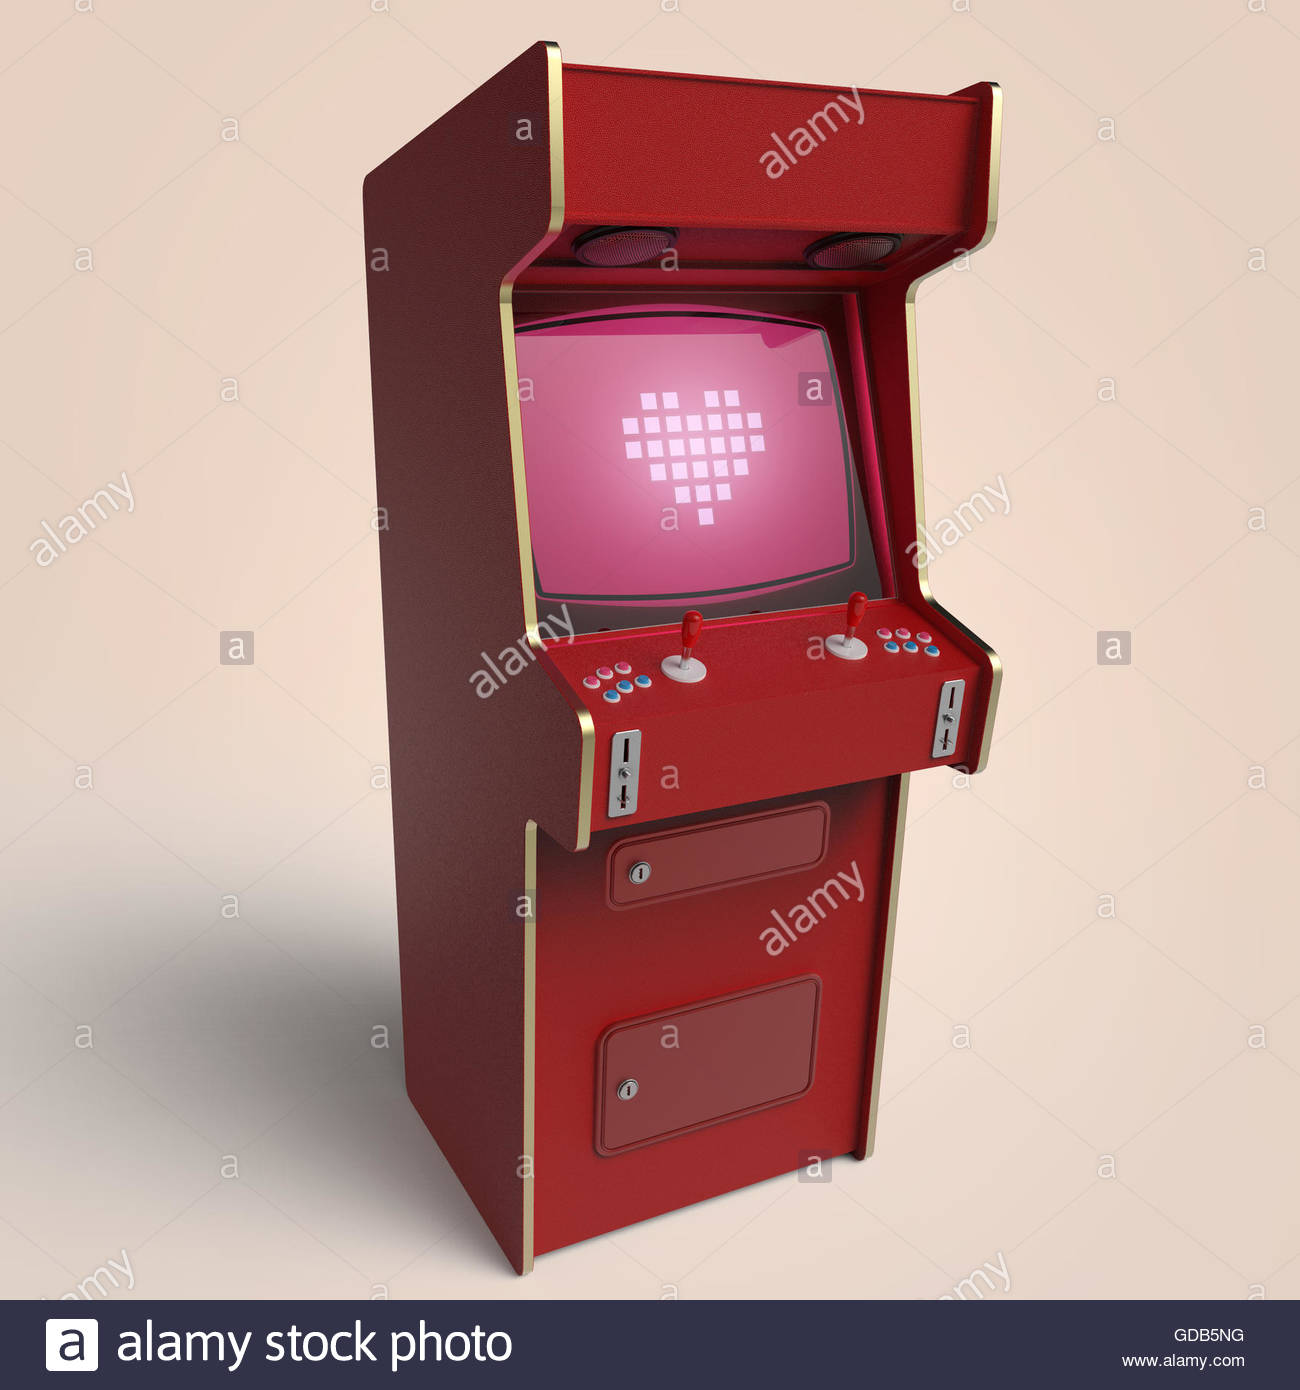 Congratulations on purchasing a MAME Cabinet